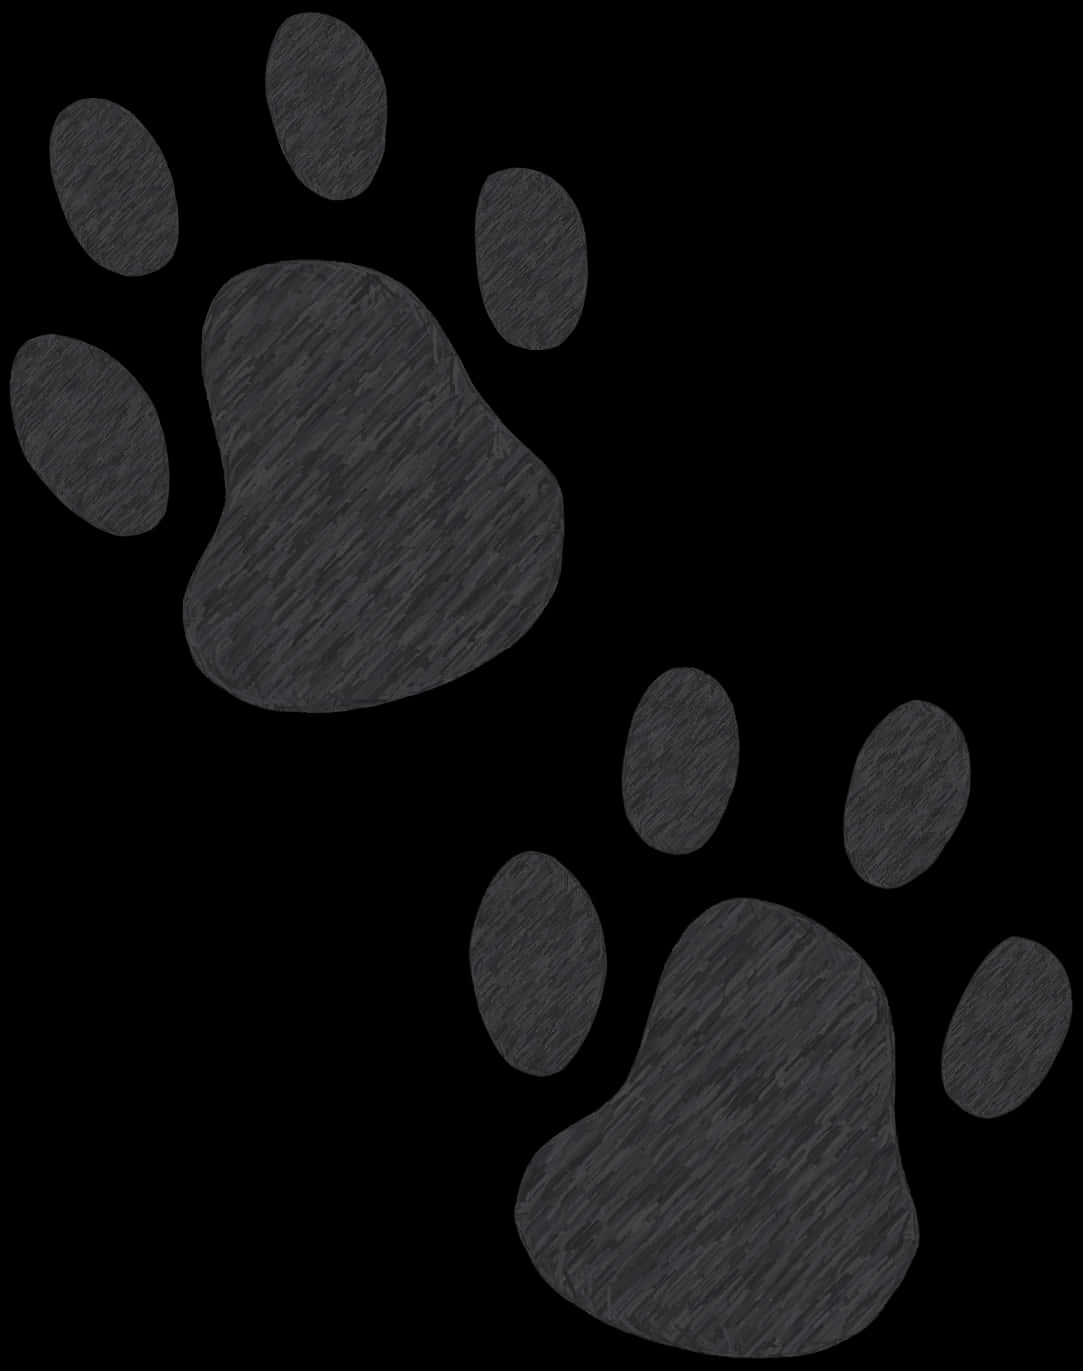 A Pair Of Paw Prints On A Black Background